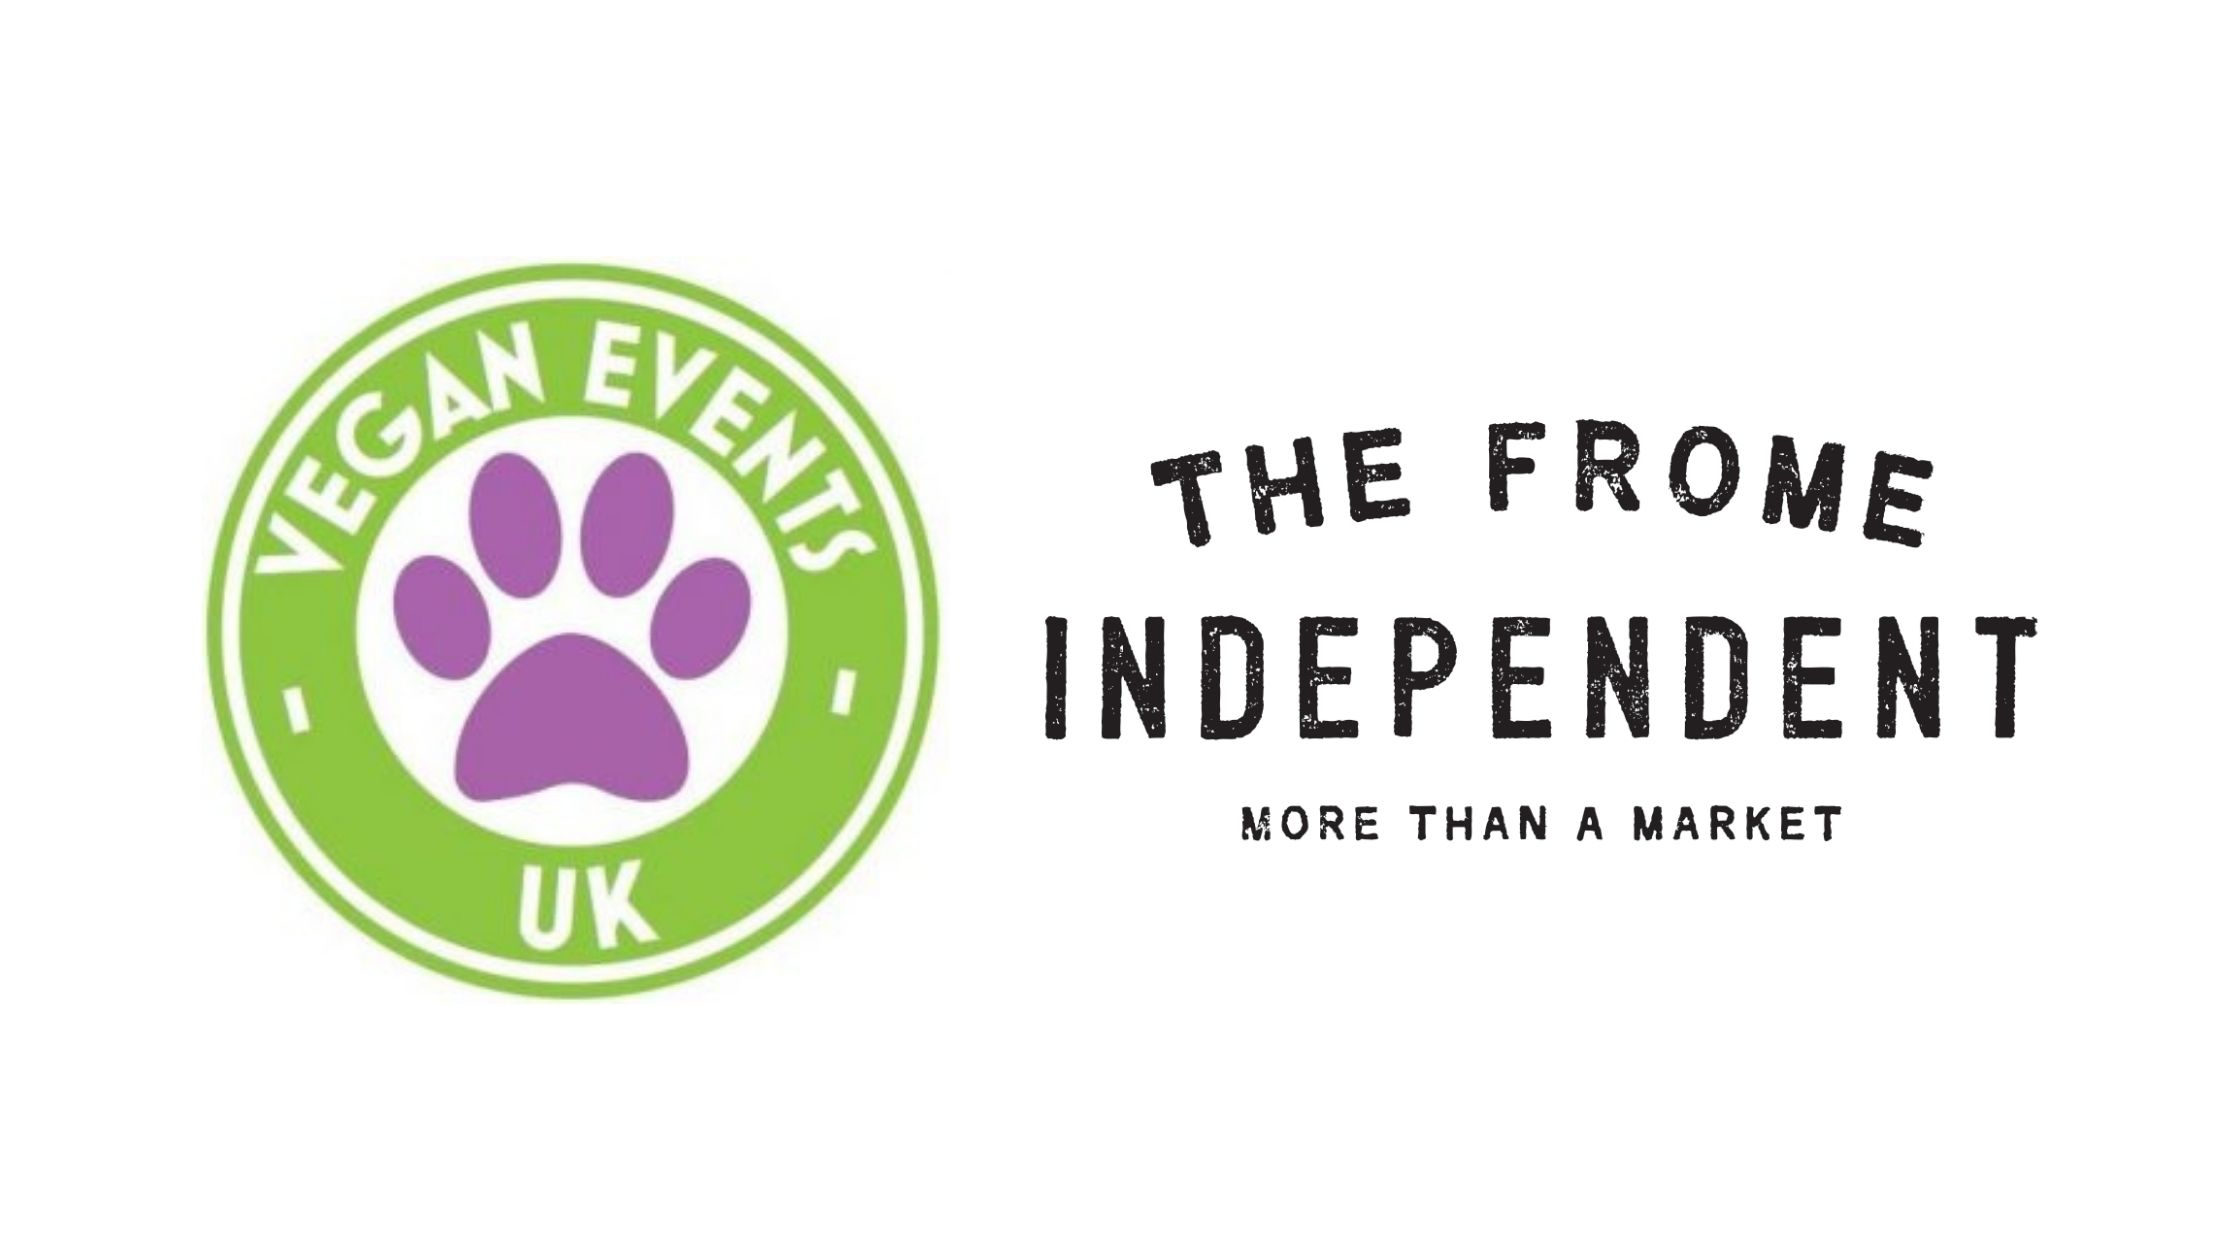 Vegan Events and Frome Independent Market Logos